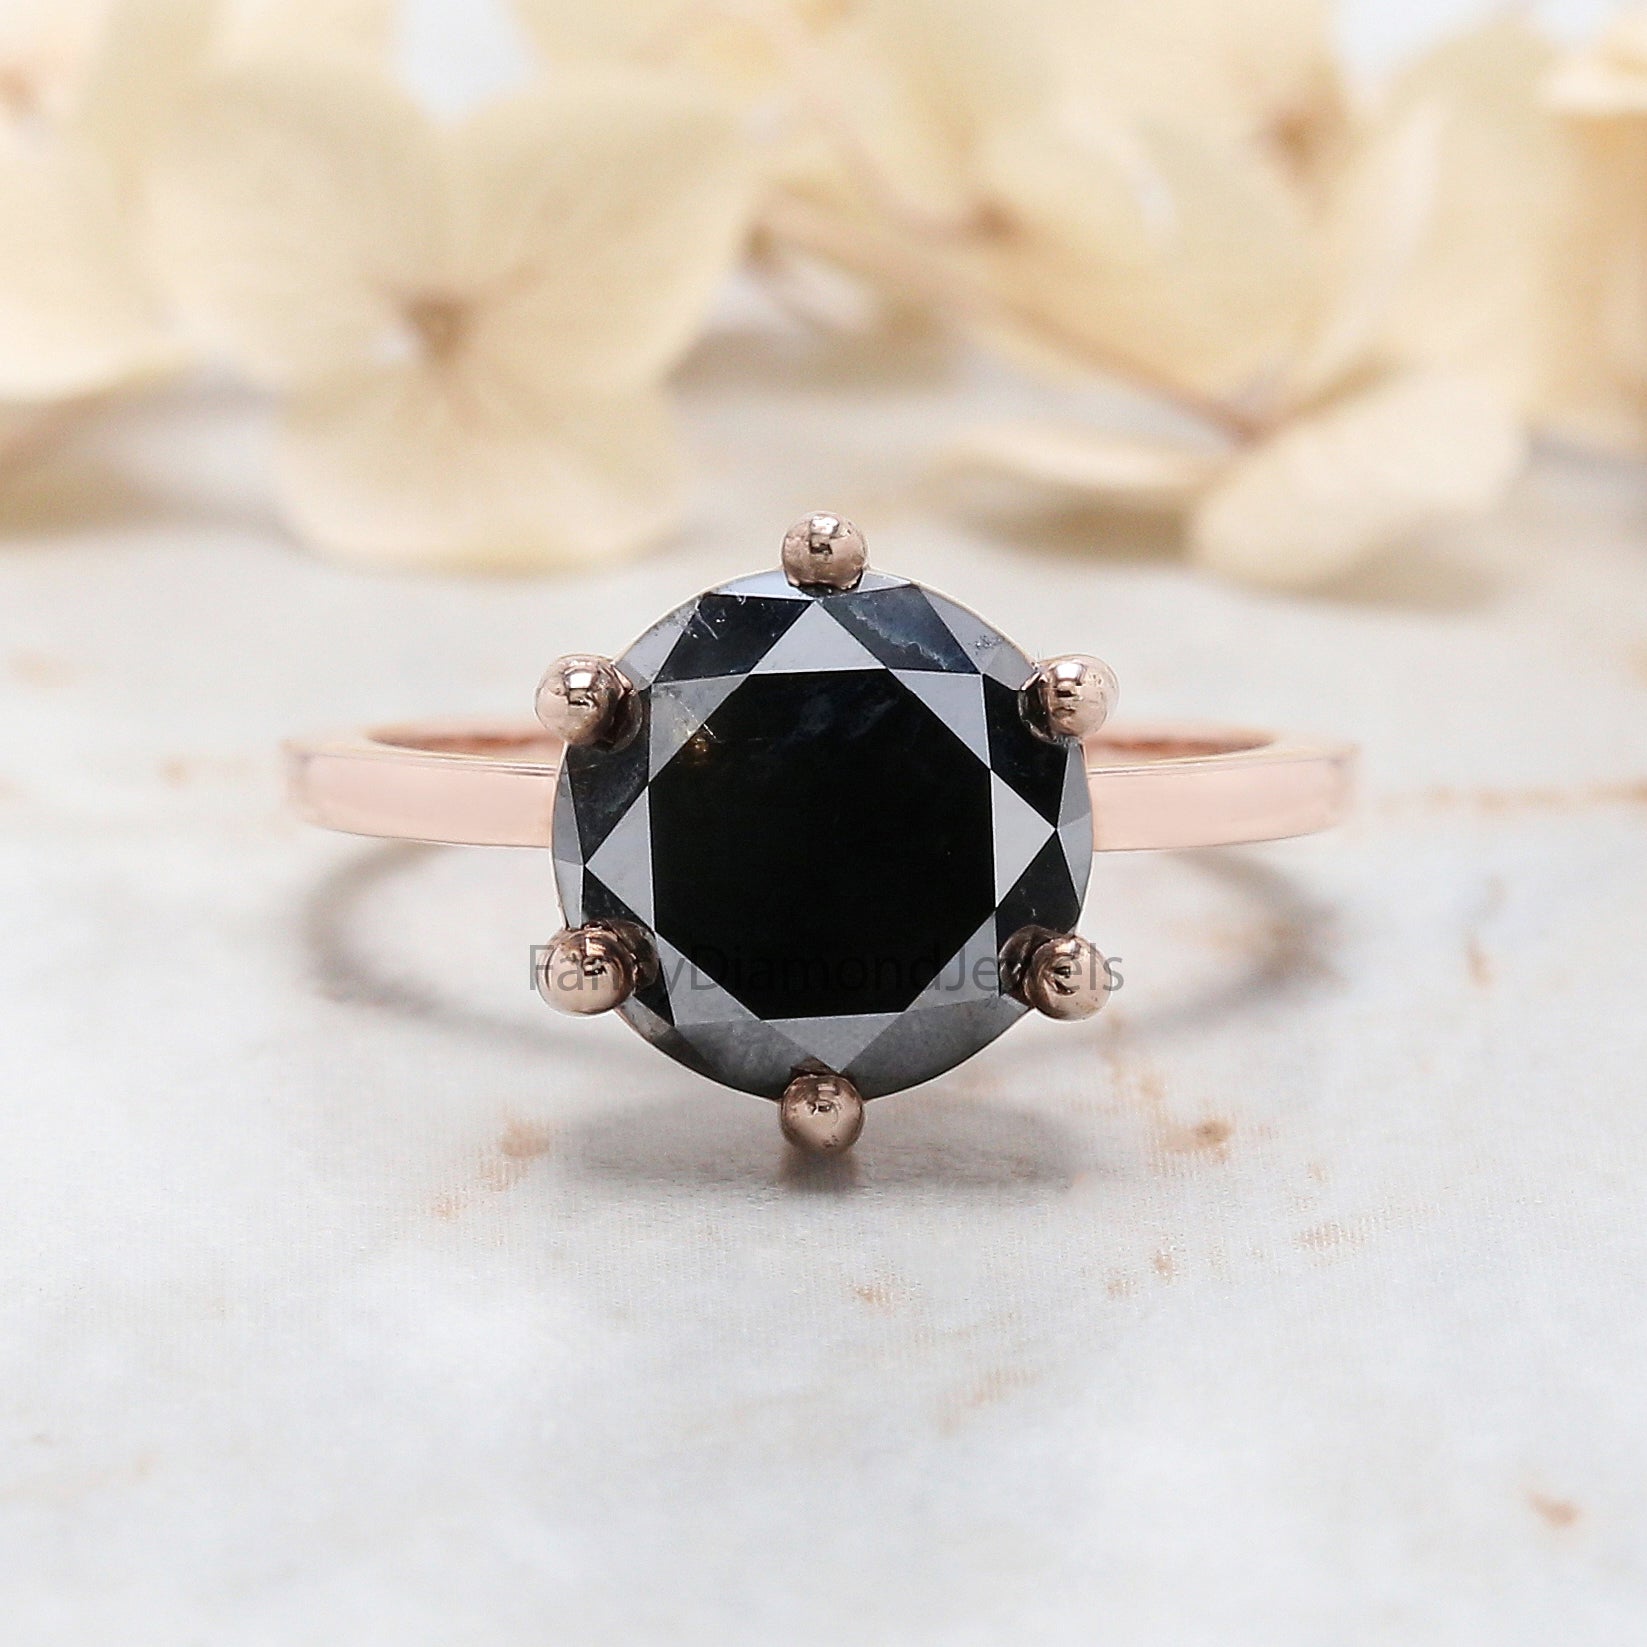 Round Shape Black Color Diamond Ring 4.23 Ct 9.67 MM Round Cut Diamond Ring 14K Solid Rose Gold Silver Engagement Ring Gift For Her QL9505